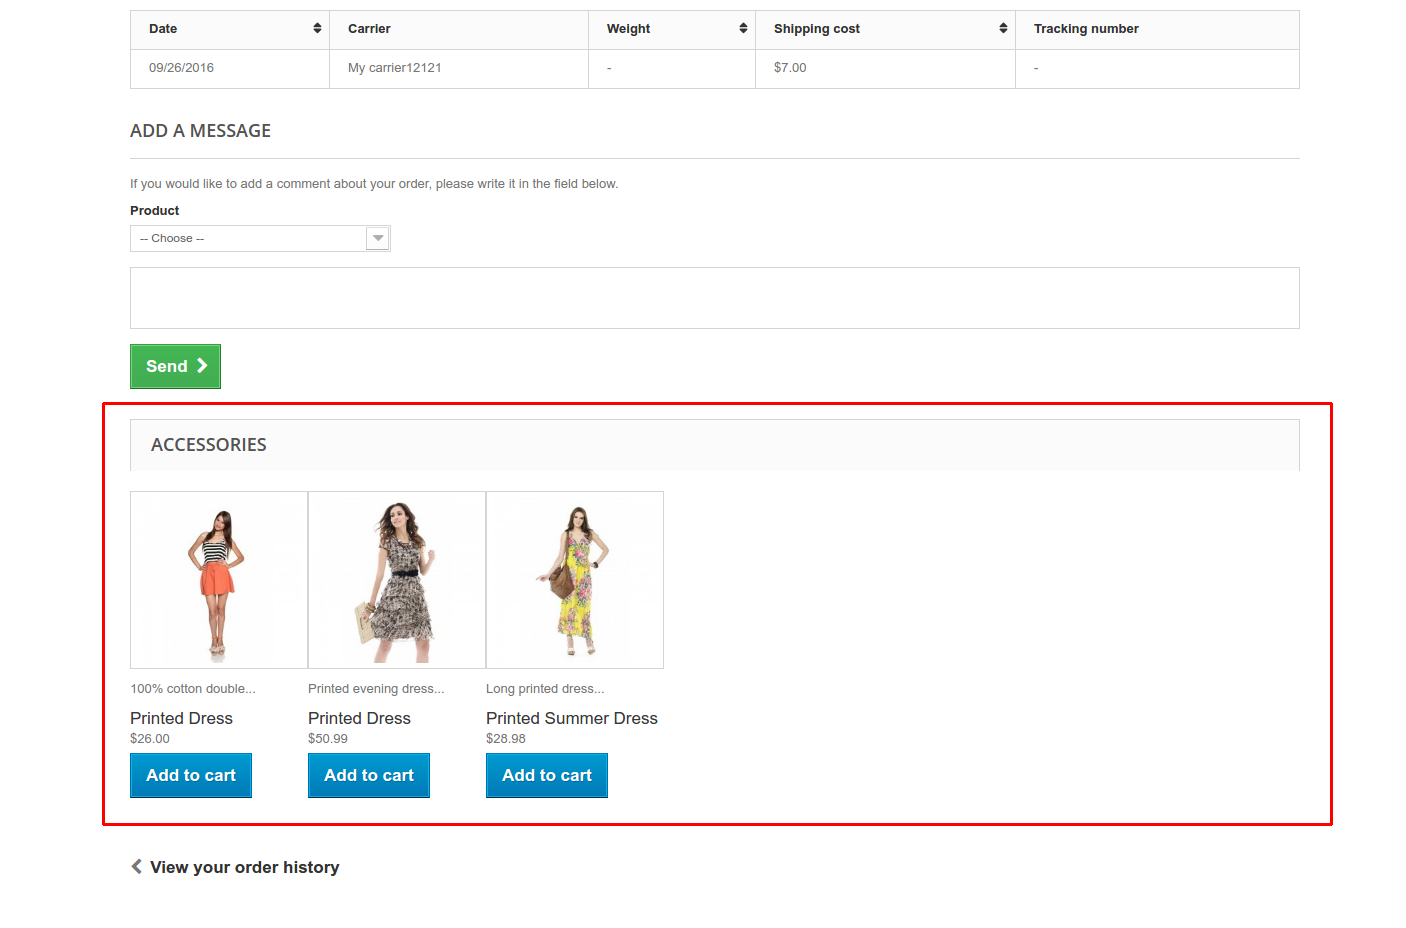 How to Customize Advanced Order Confirmation Page in PrestaShop